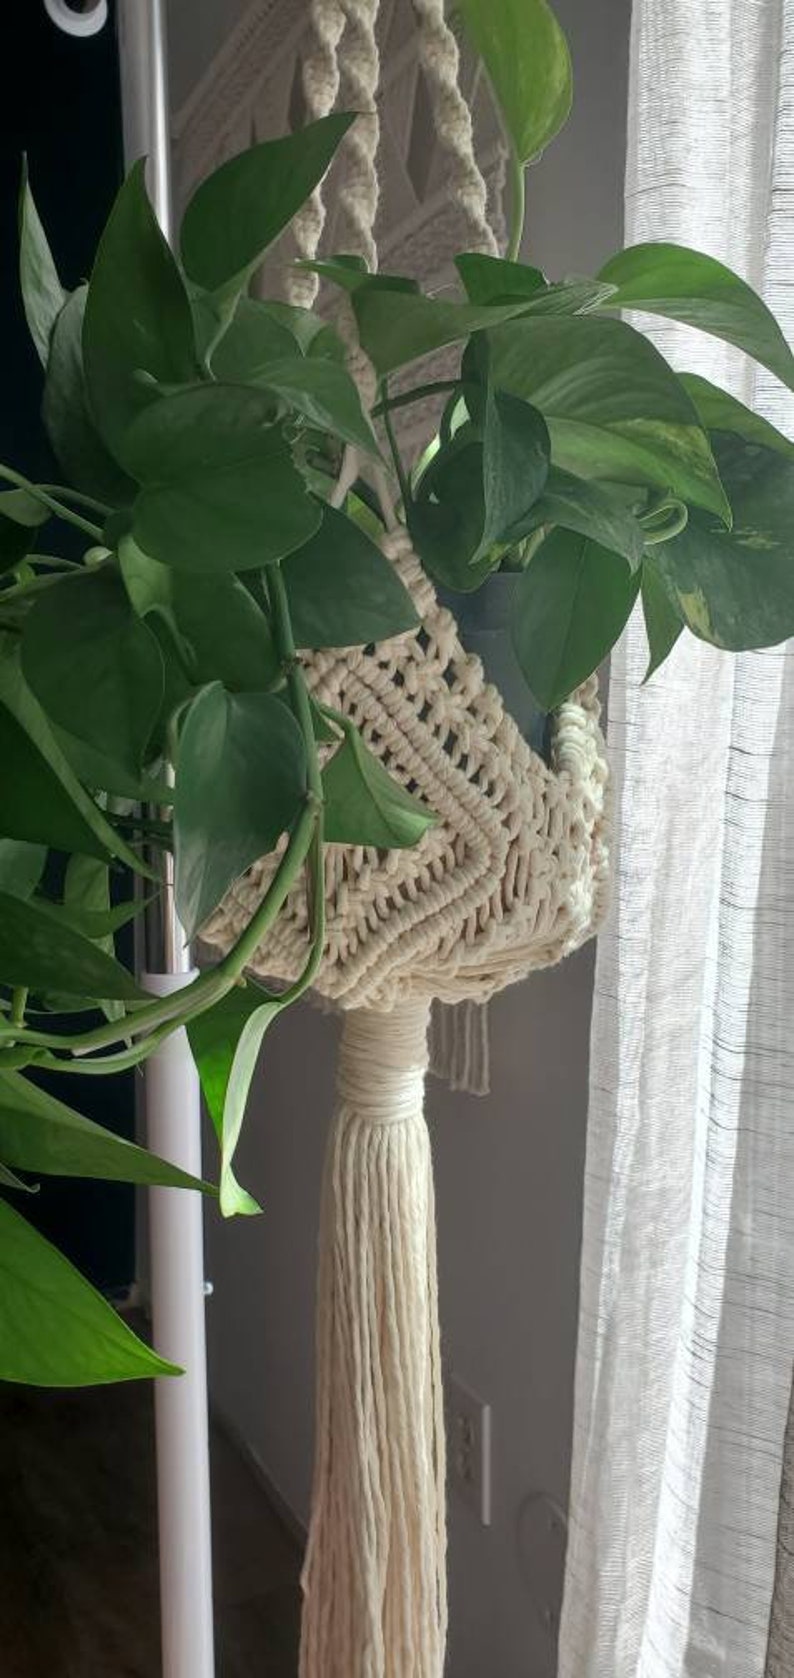 Macrame Plant Hanger Pattern Macrame Hanging Planter PDF Tutorial with pictures, step-by-step guide and knot guide for beginners image 2